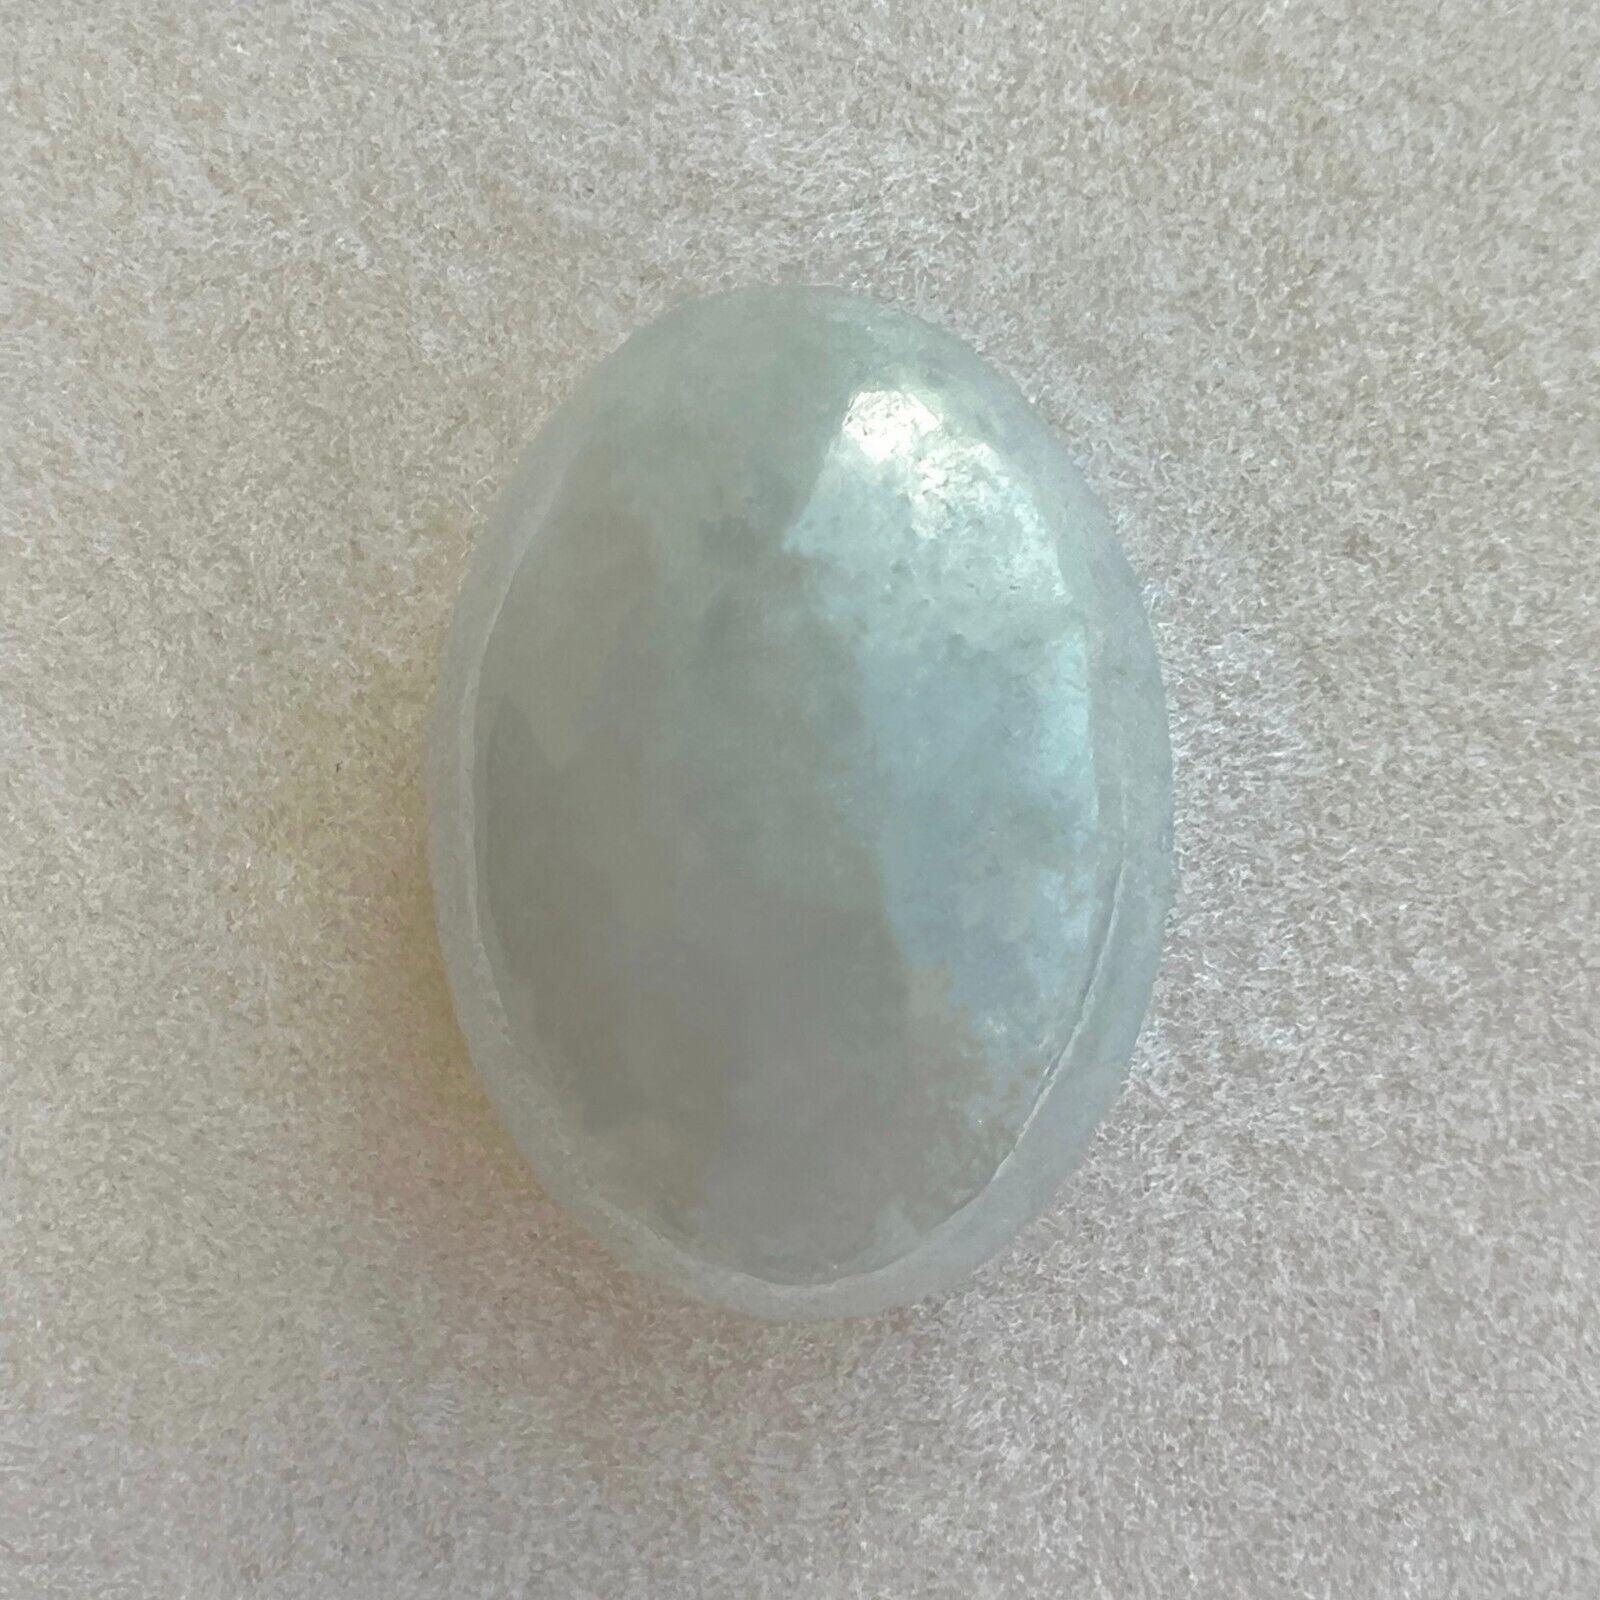 Oval Cut 27.15Ct IGI Certified Grey White 'ice' Jadeite Jade ‘A’ Grade Cabochon Untreated For Sale